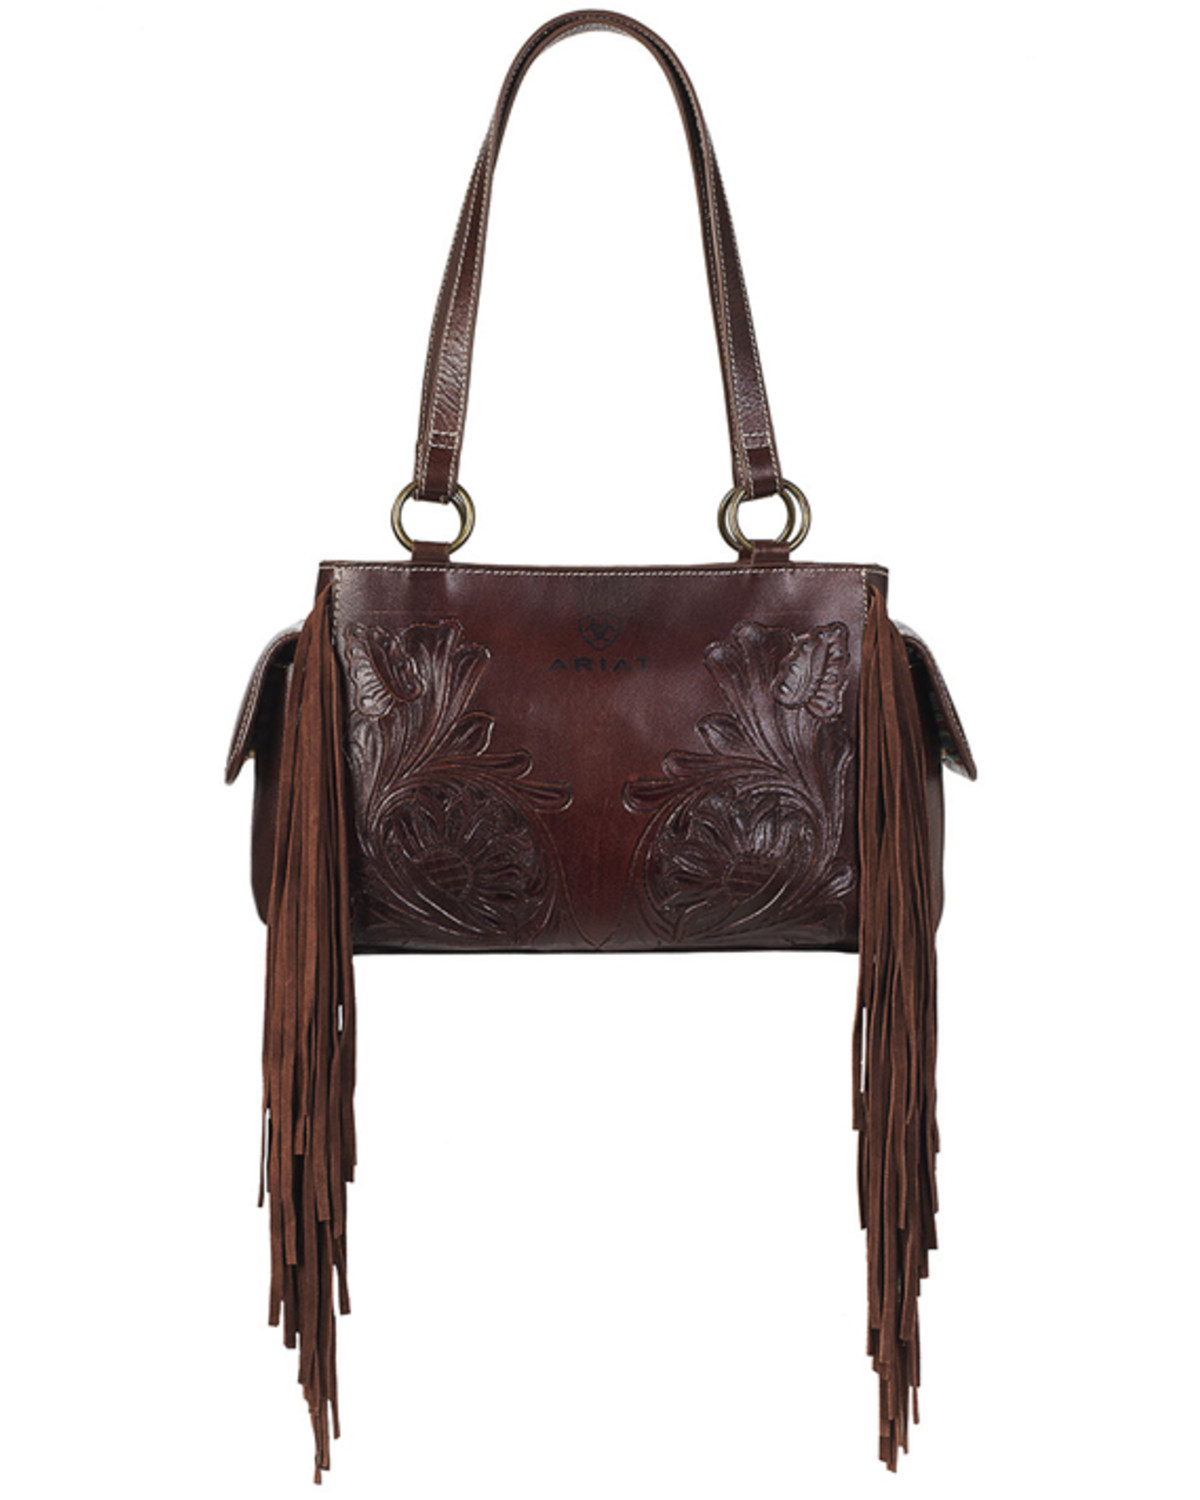 Ariat Women's Victoria Tooled Leather Fringe Concealed Carry Satchel Purse